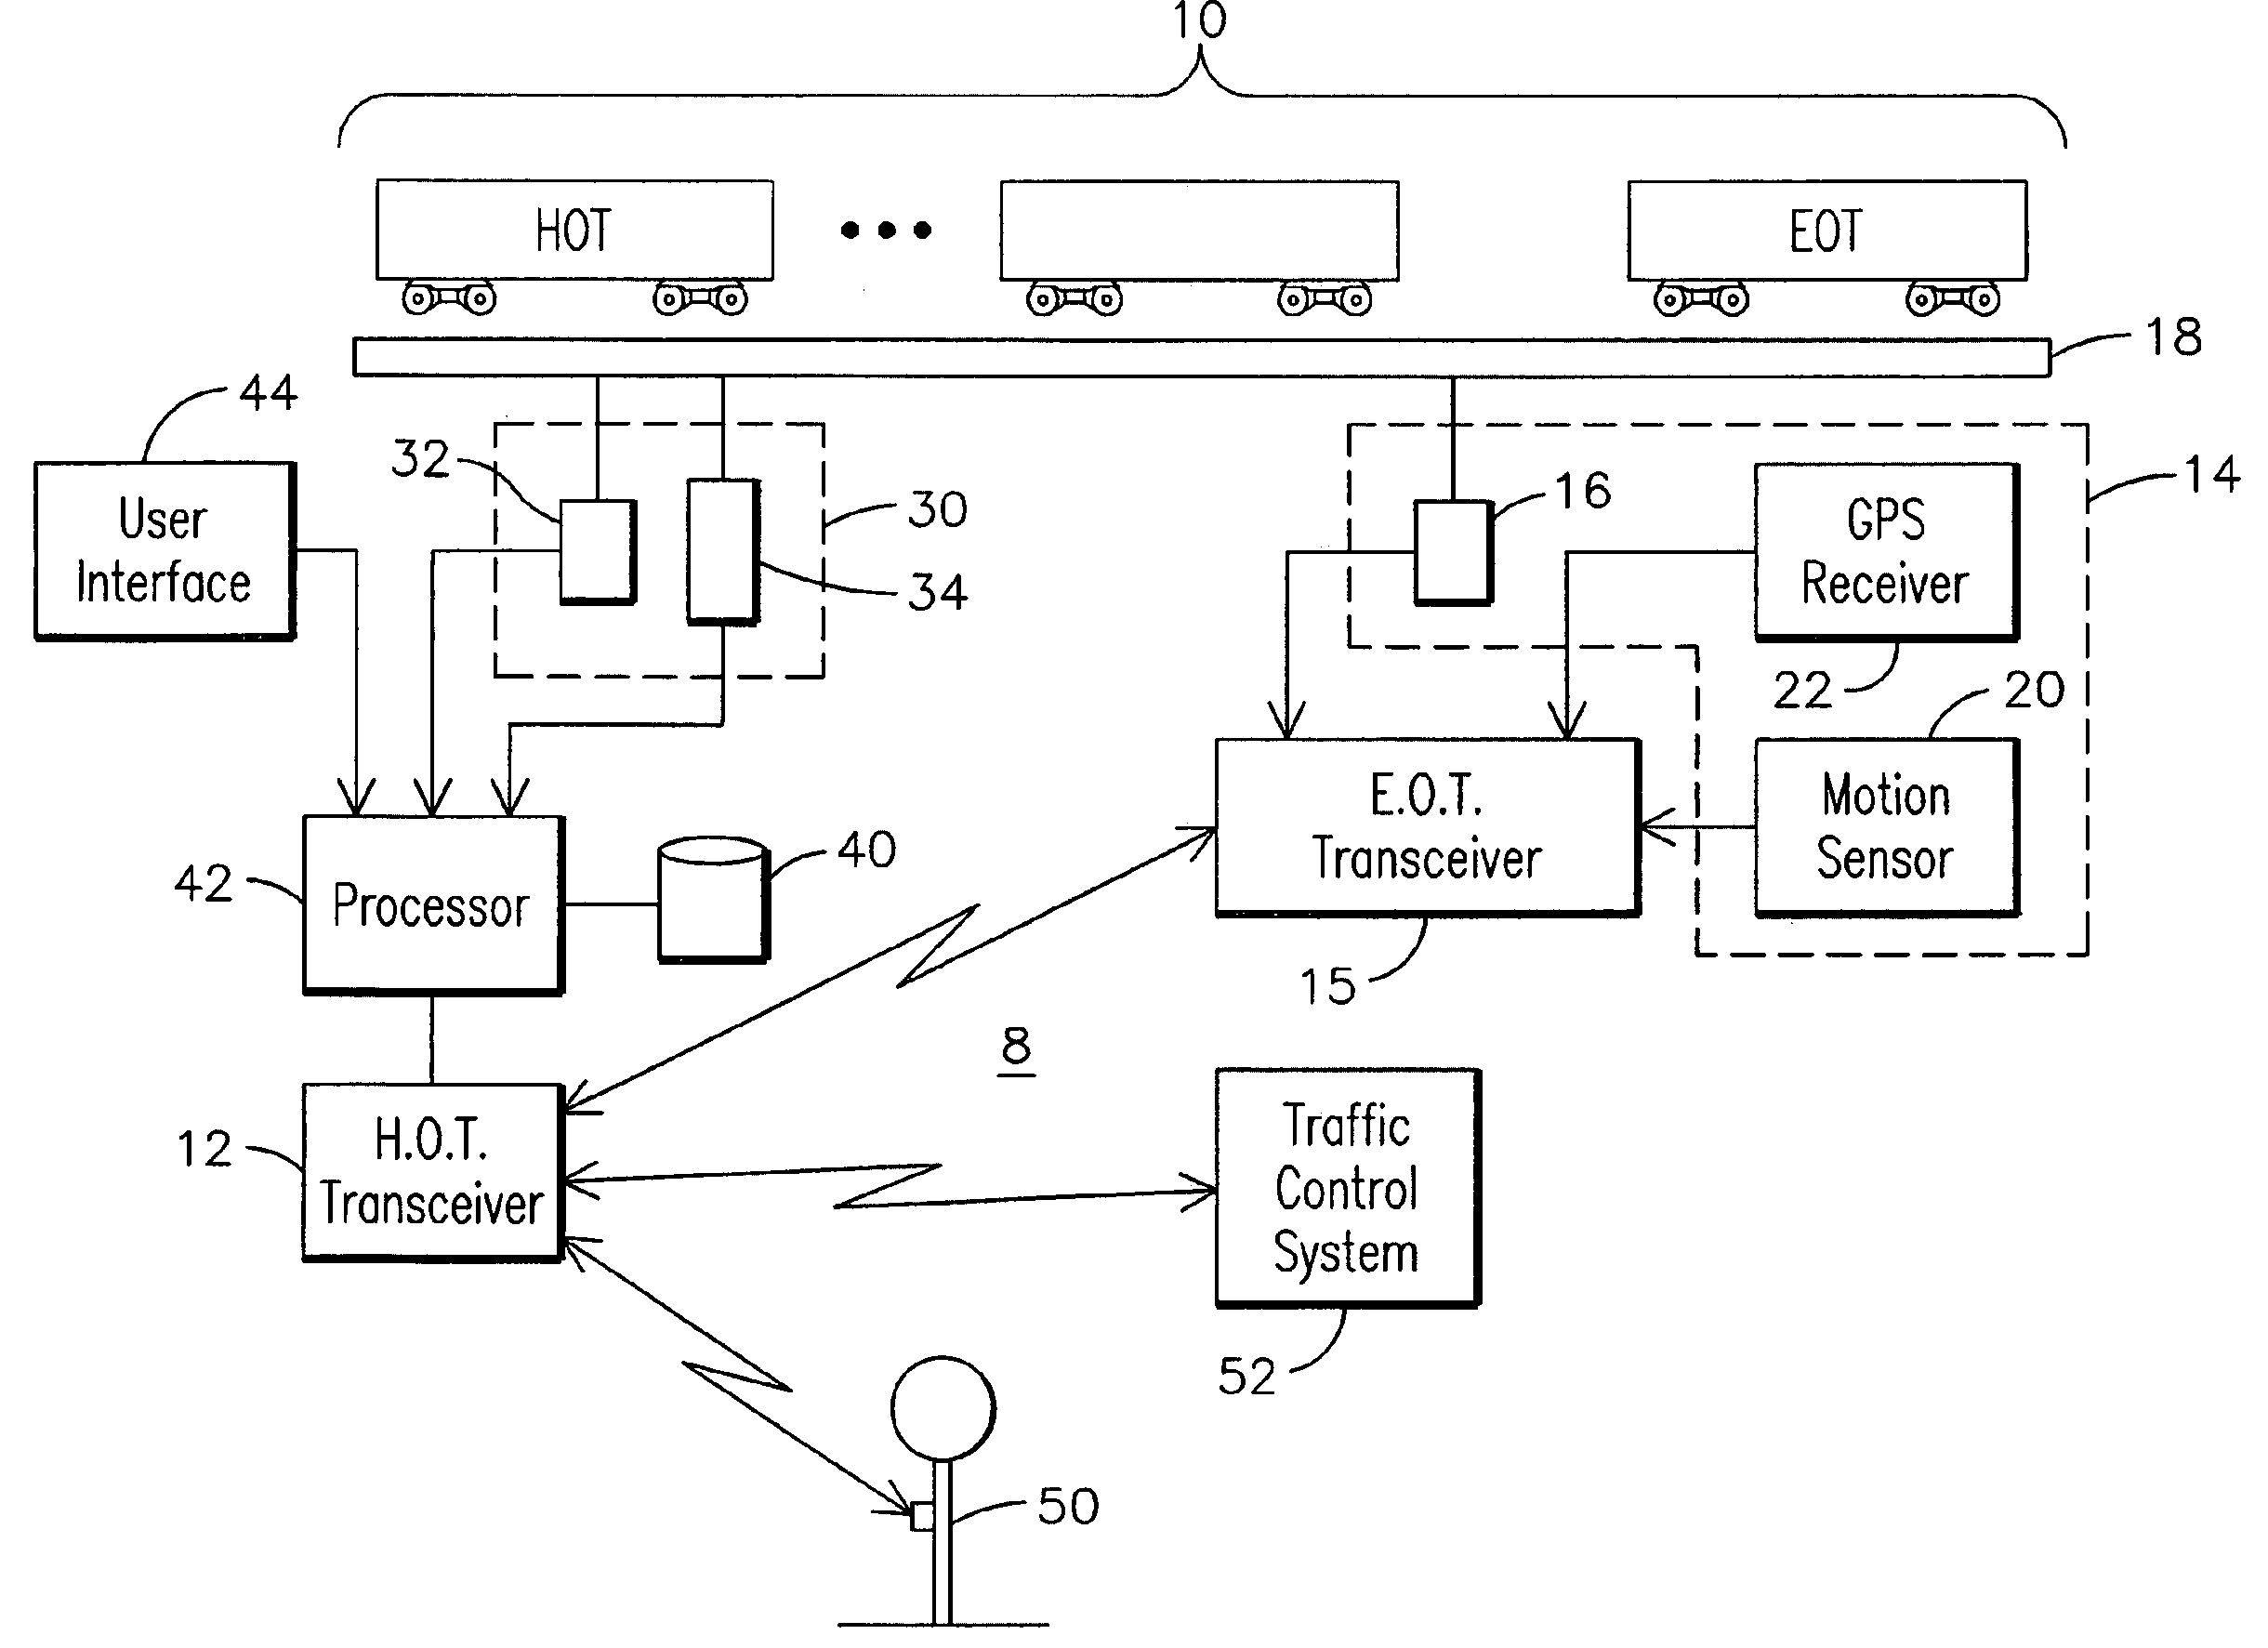 Method and computer program product for monitoring integrity of railroad train